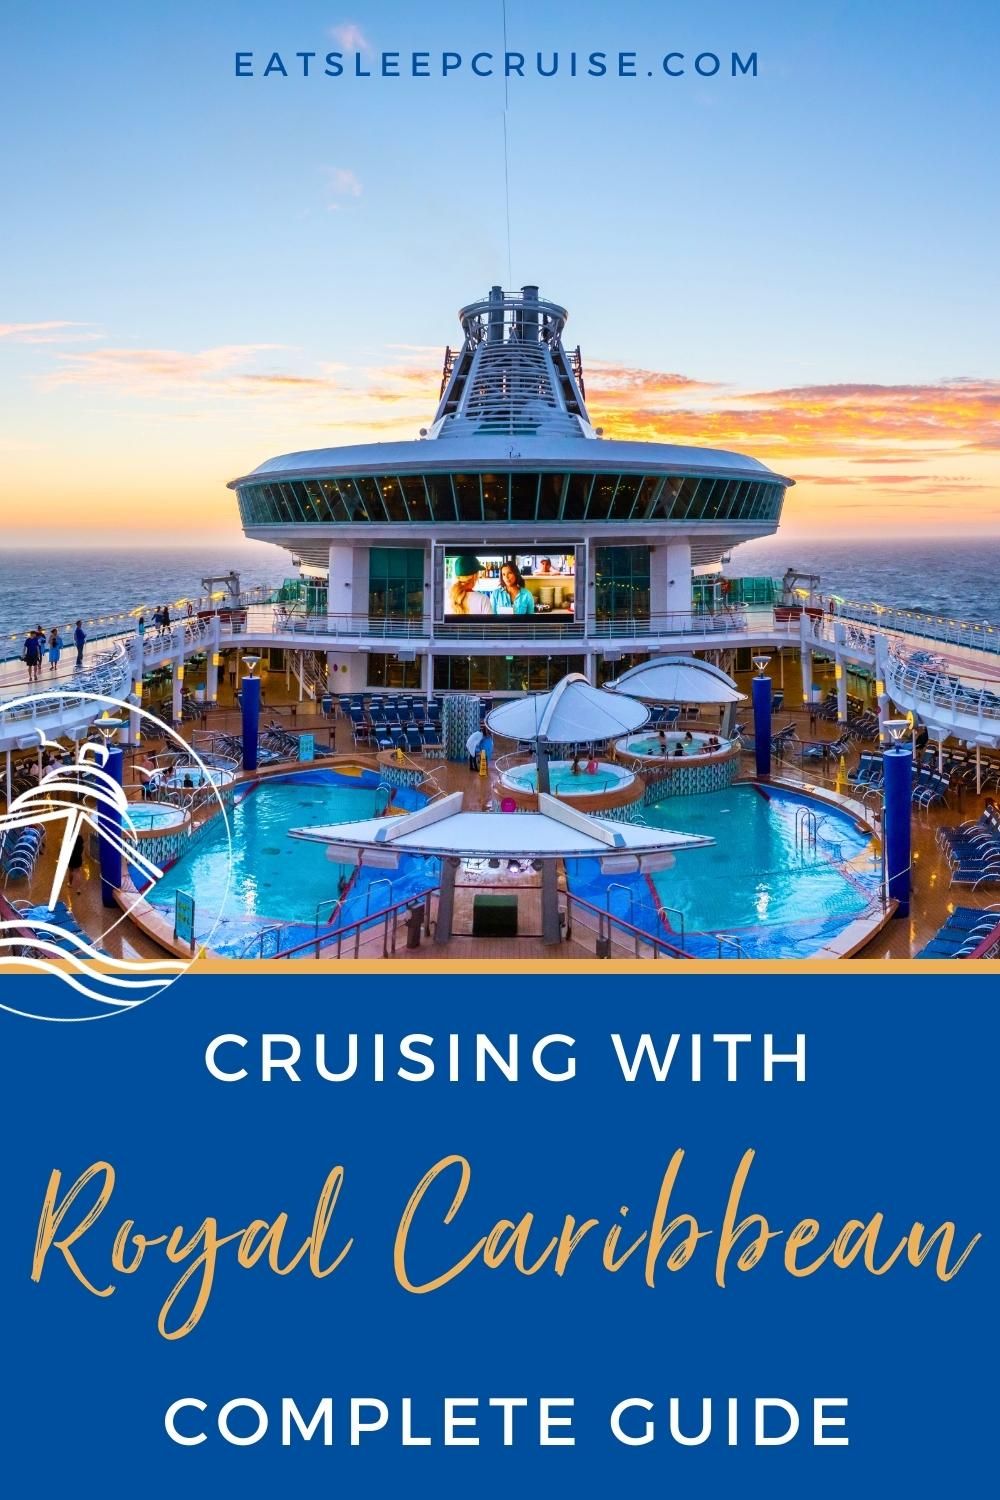 Complete Guide to Cruising With Royal Caribbean